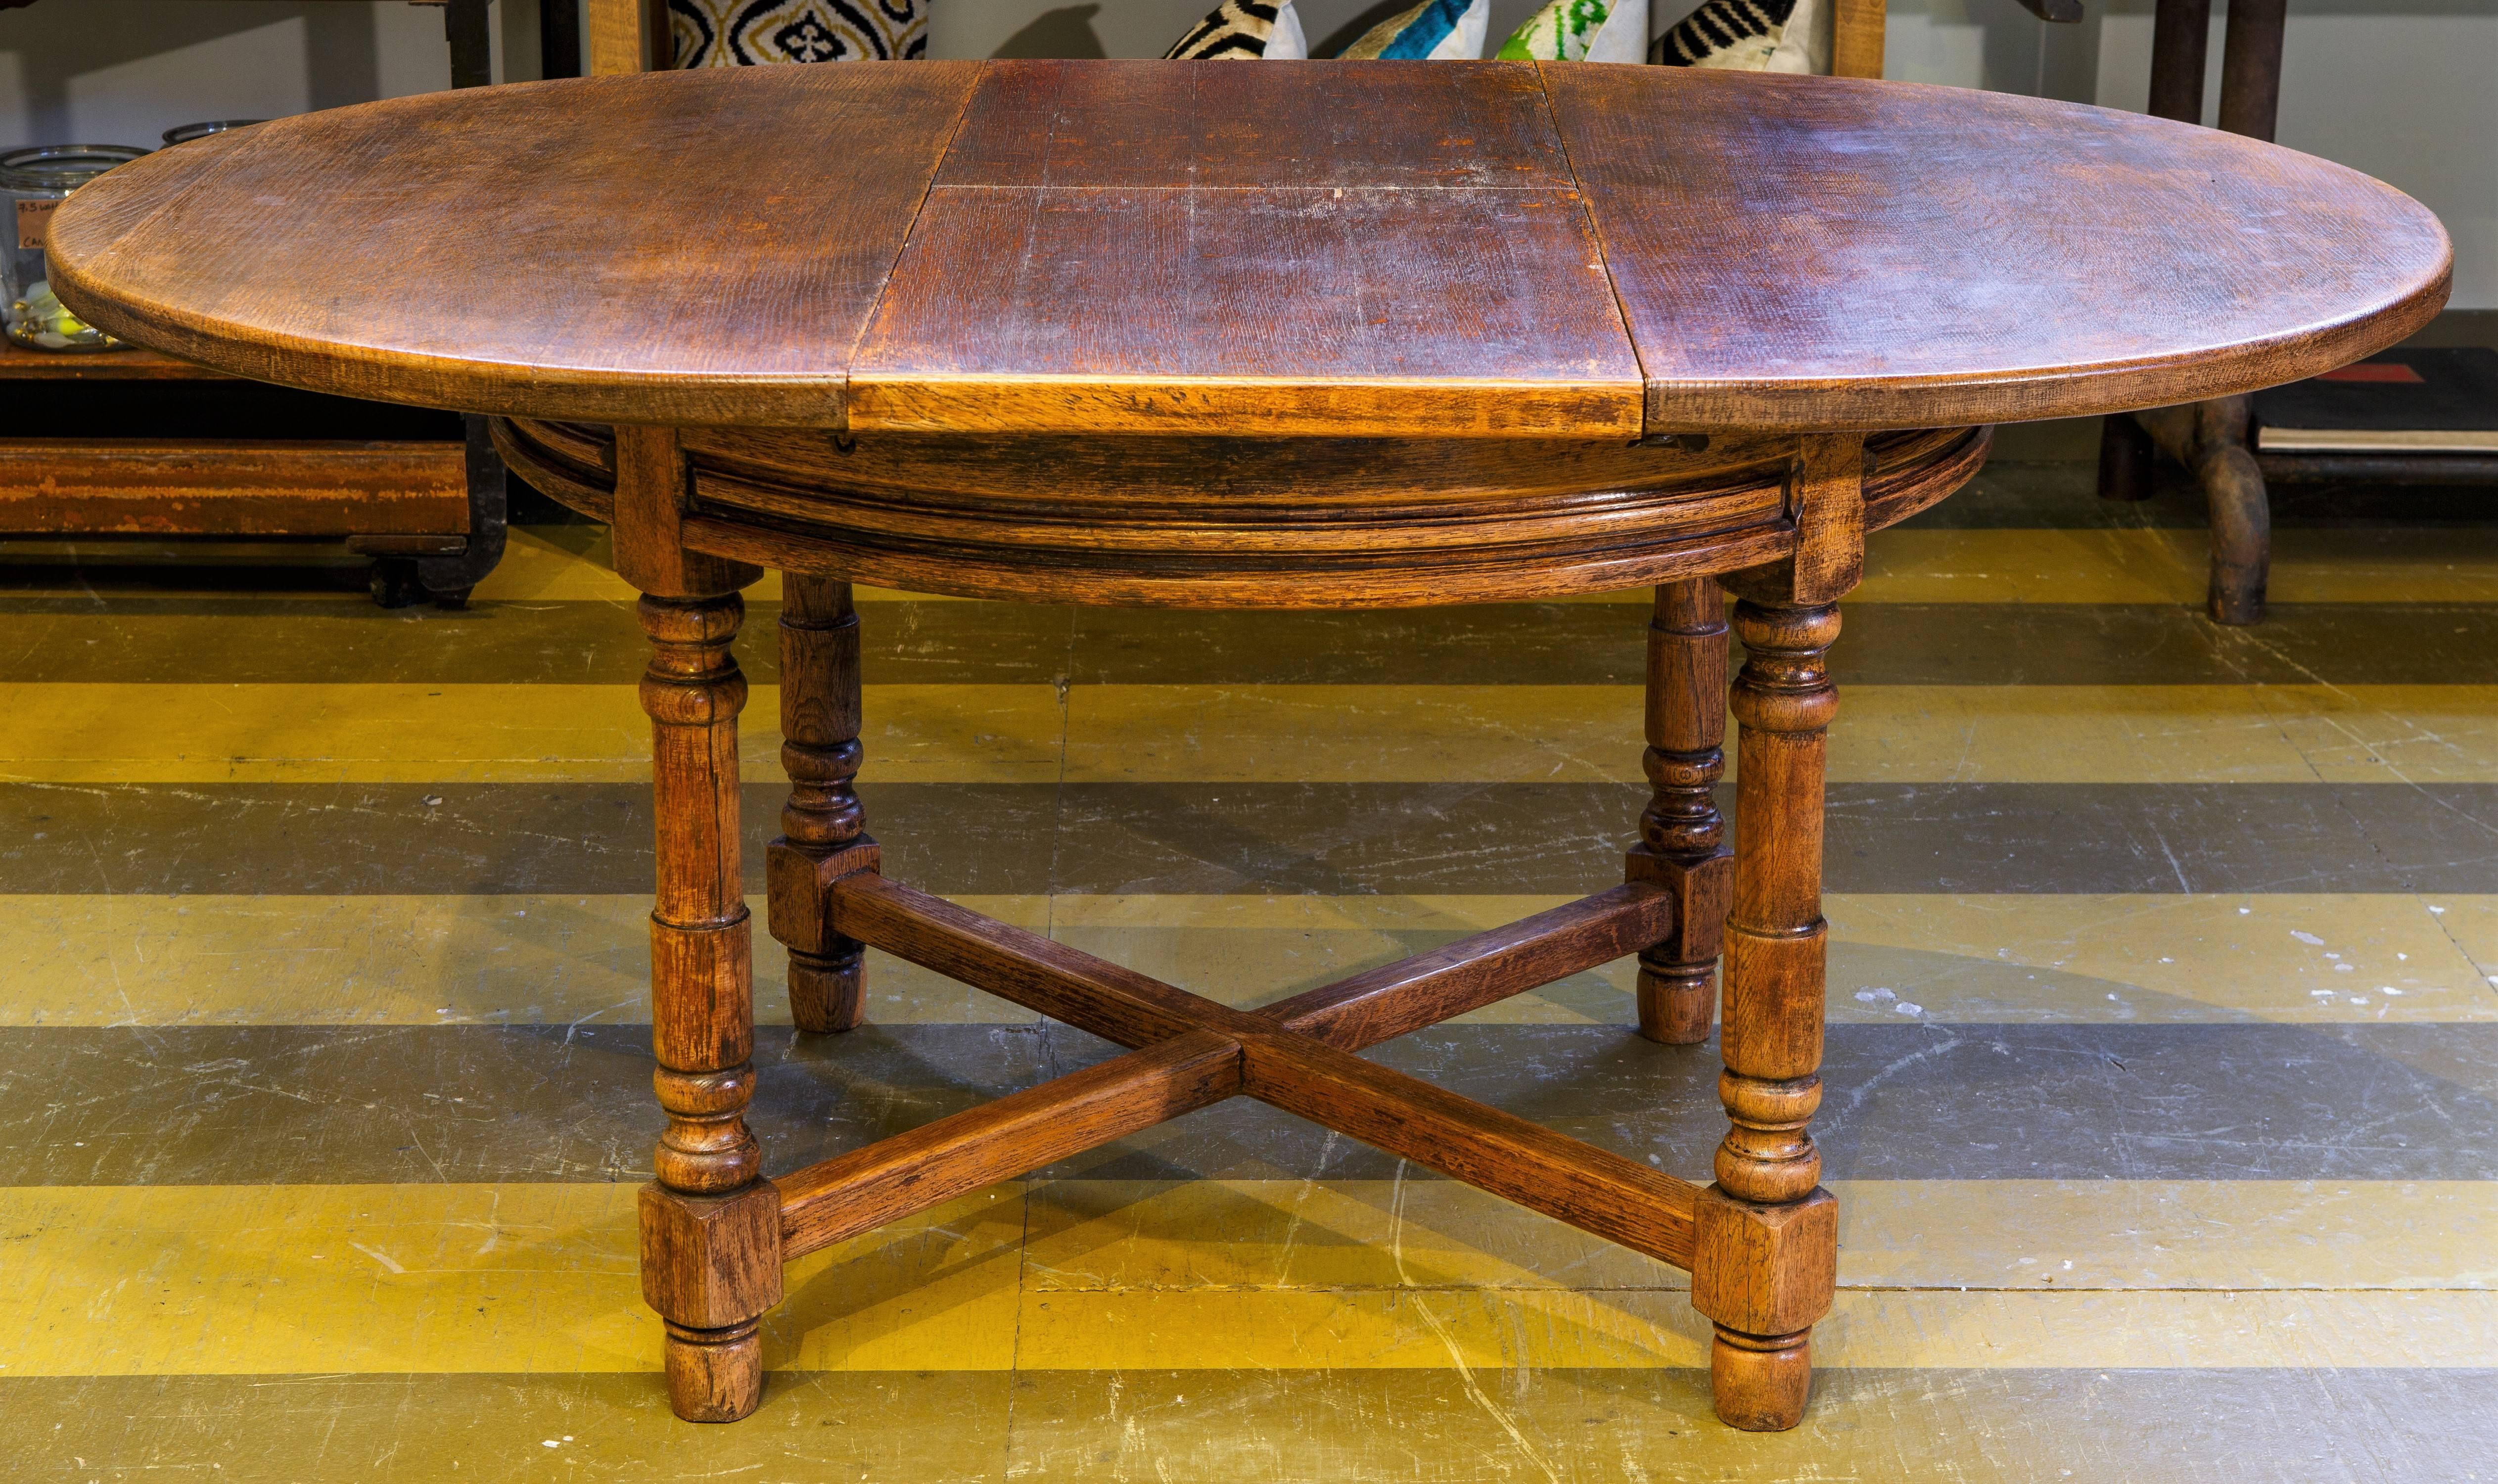 Charming, French oak extension table with one hidden table leaf.

Measures: 63.75